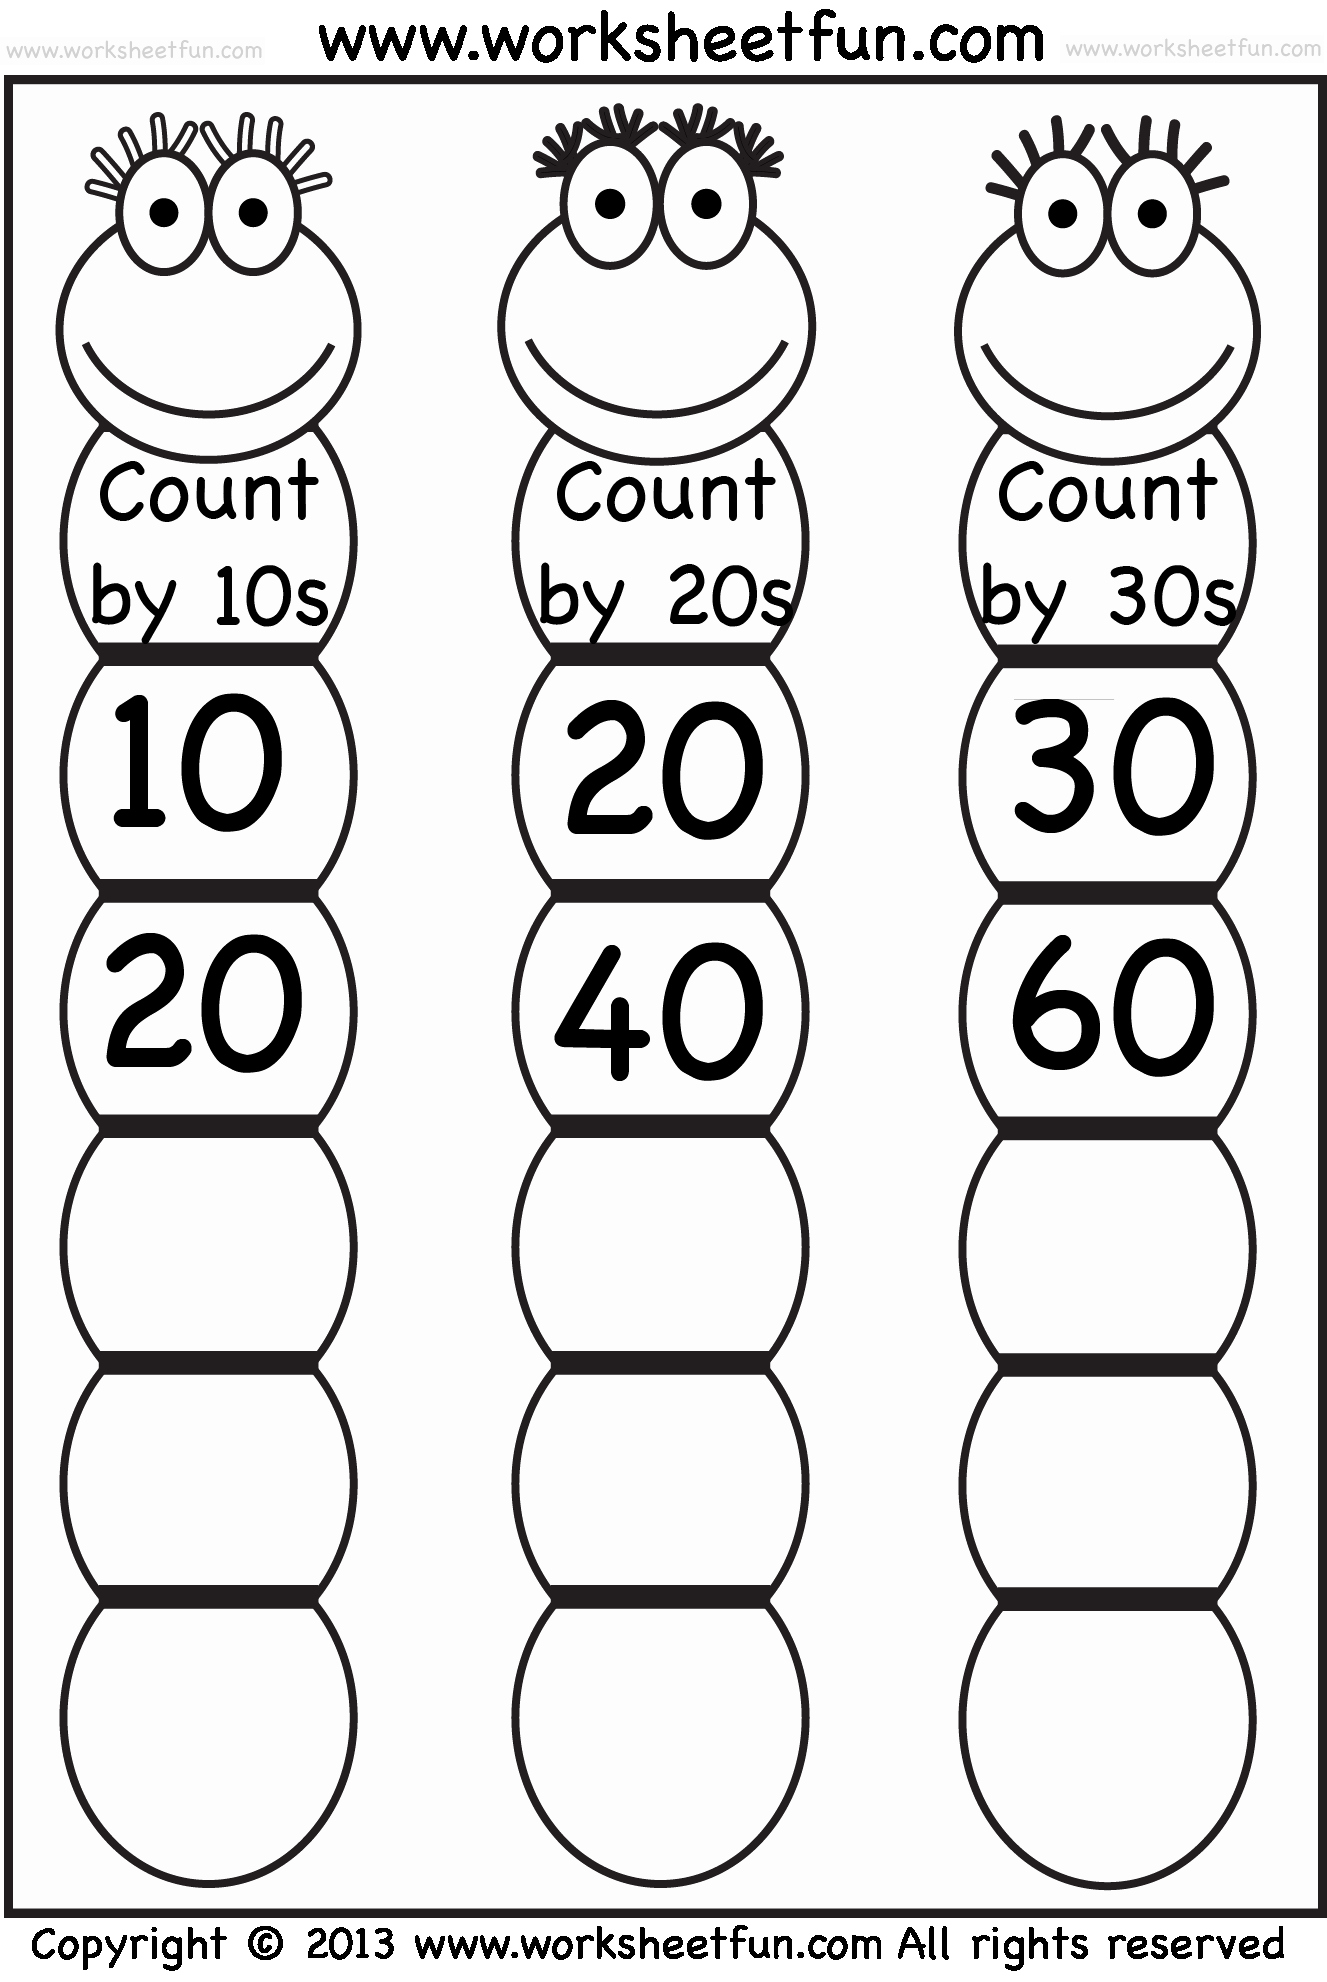 Counting In 10s Worksheet Awesome Skip Counting by 10 20 and 30 – Worksheet Free